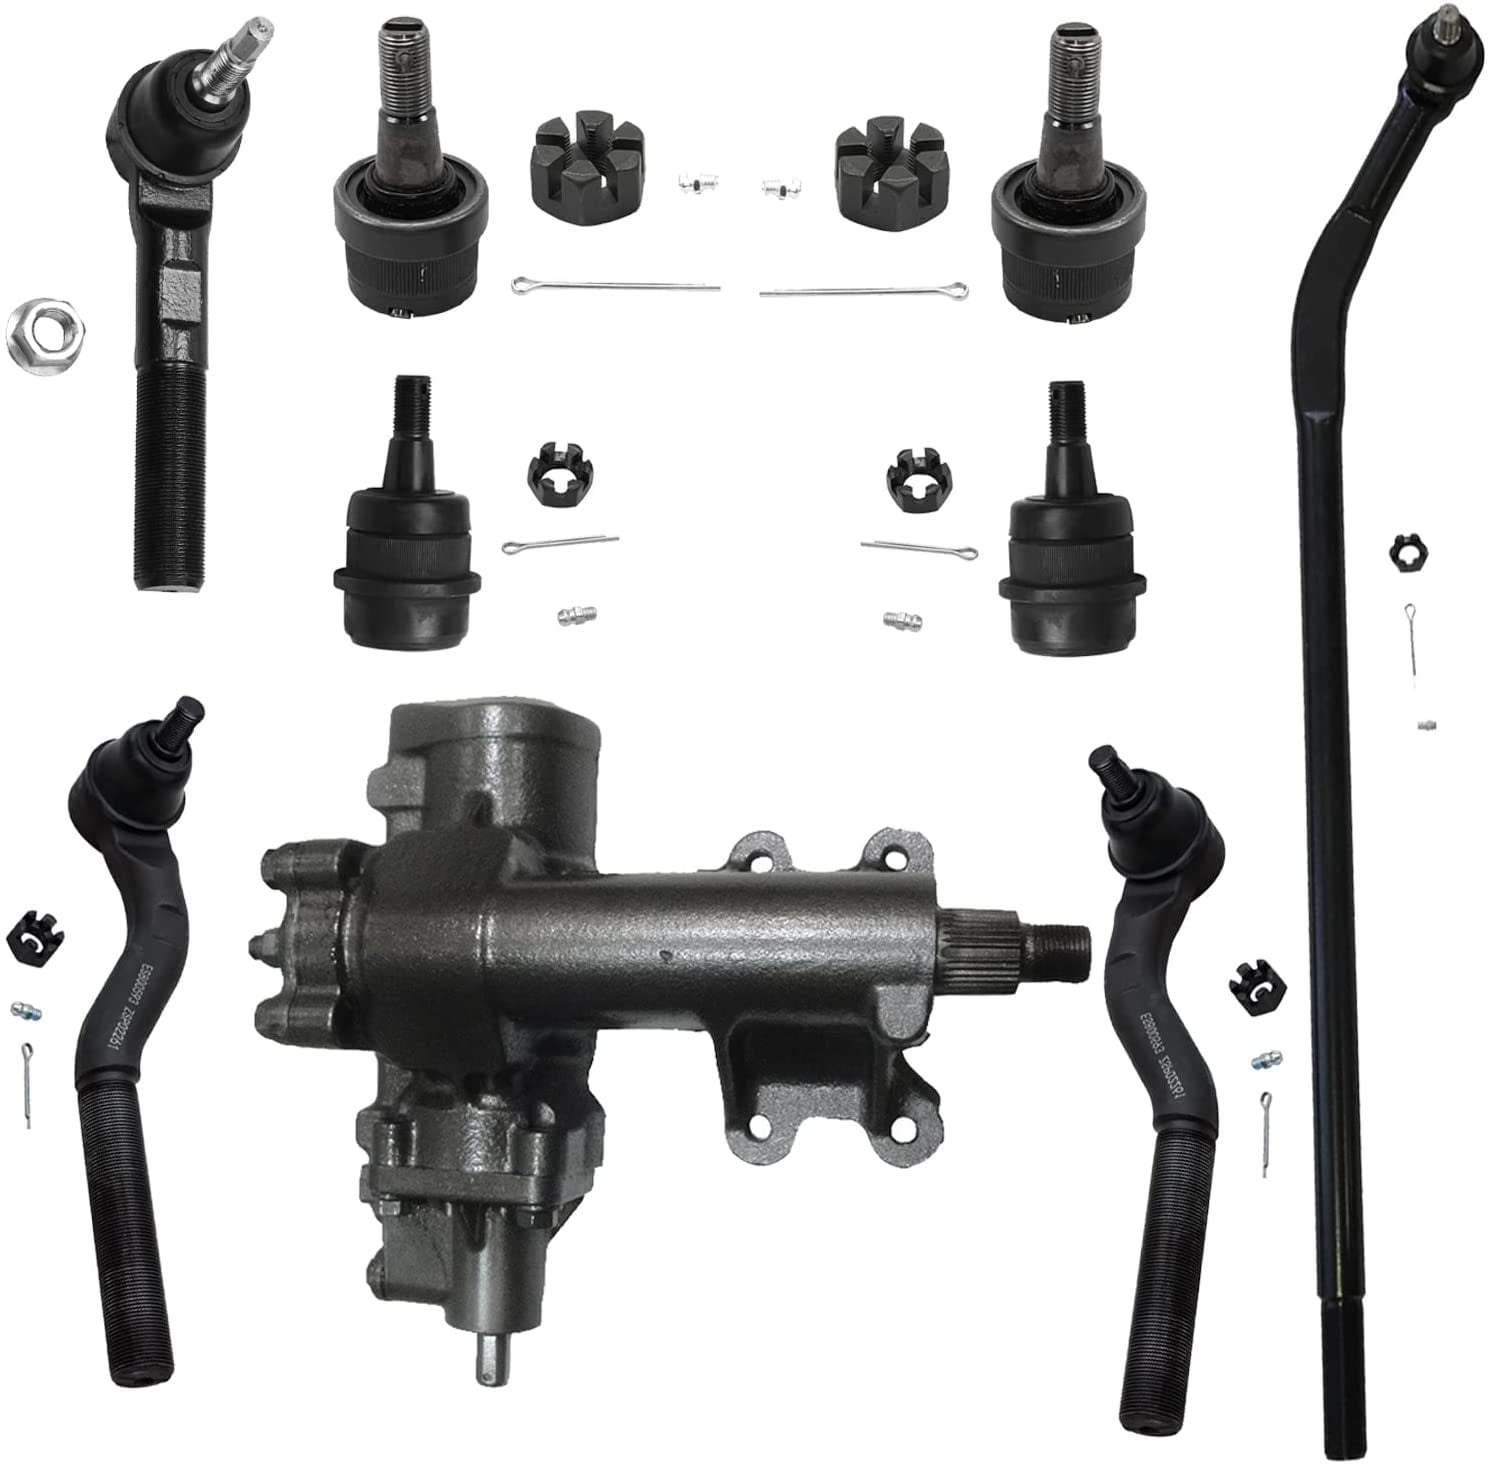 Detroit Axle - 9pc Power Steering Gear Box Tie Rods Ball Joints Replacement  for Jeep Wrangler 